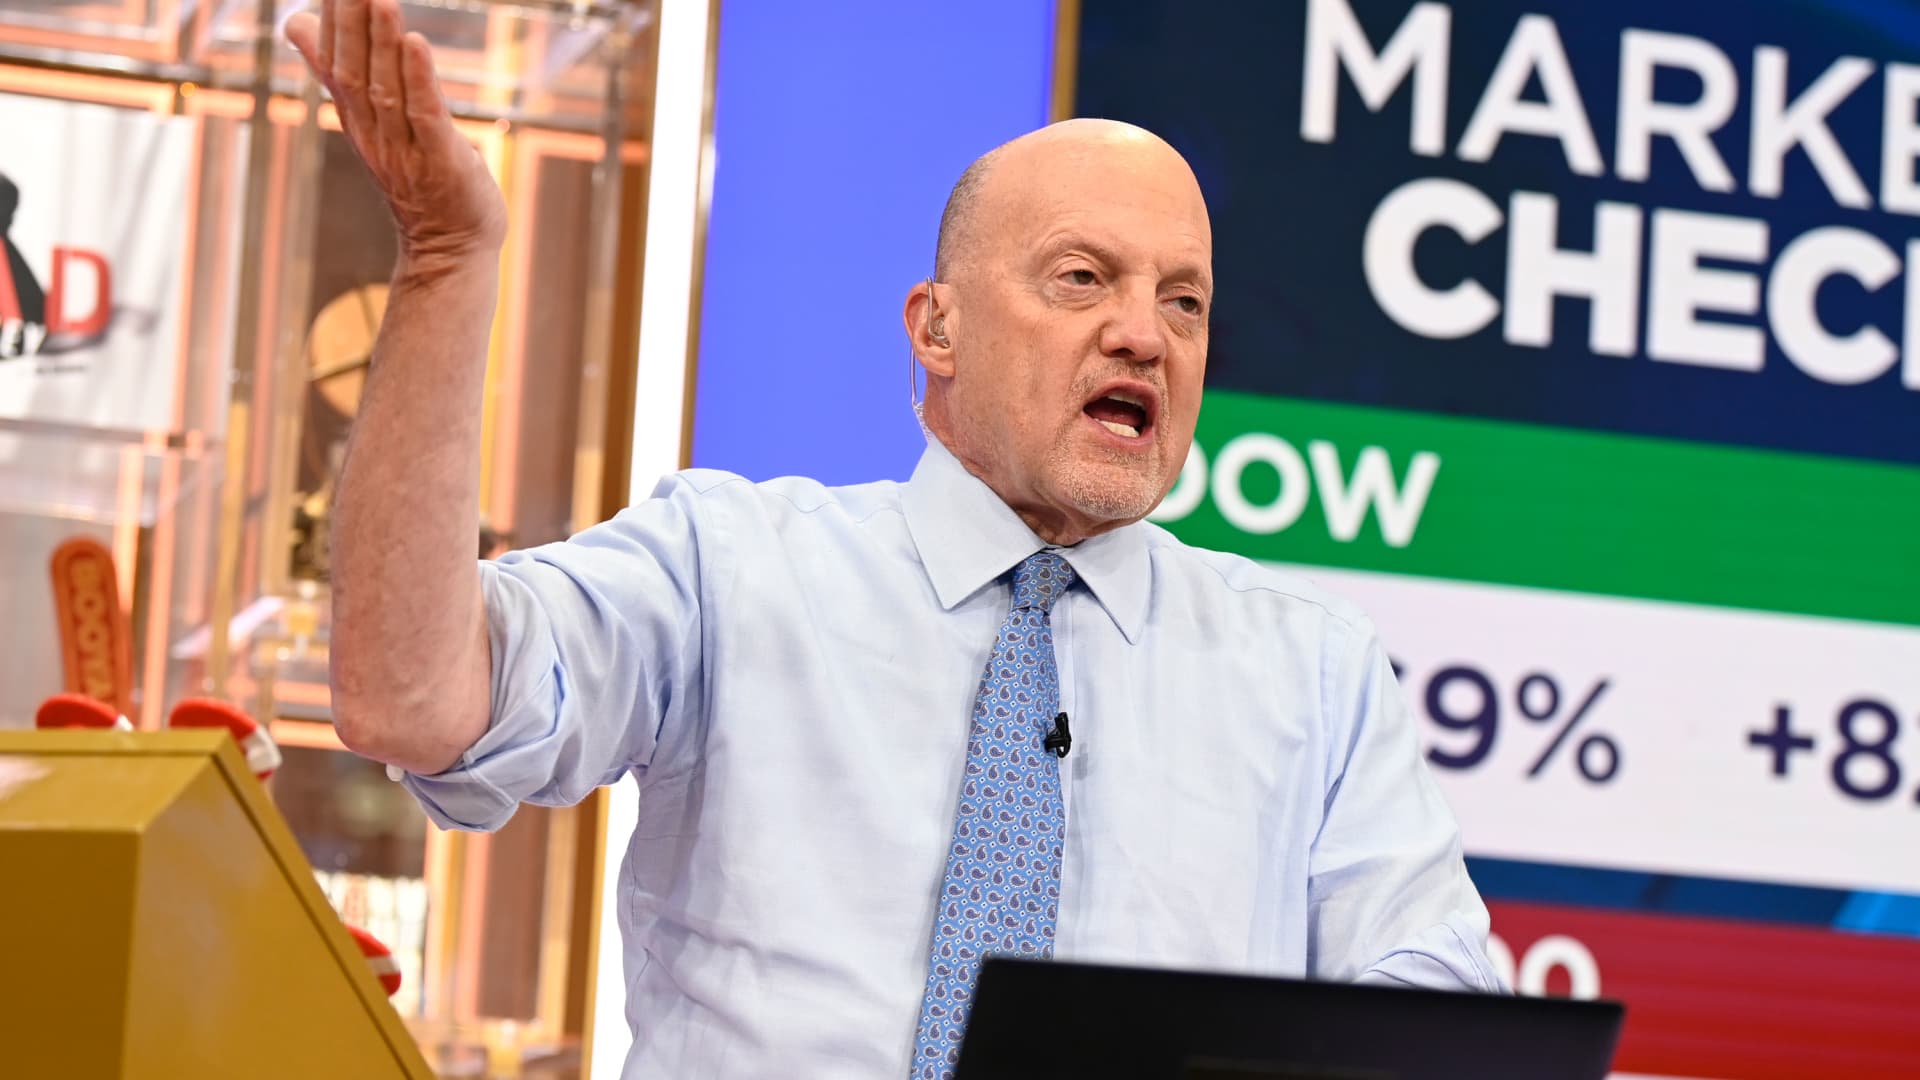 Cramer points to signs the economy is slowing that could bring rate cuts from the Fed